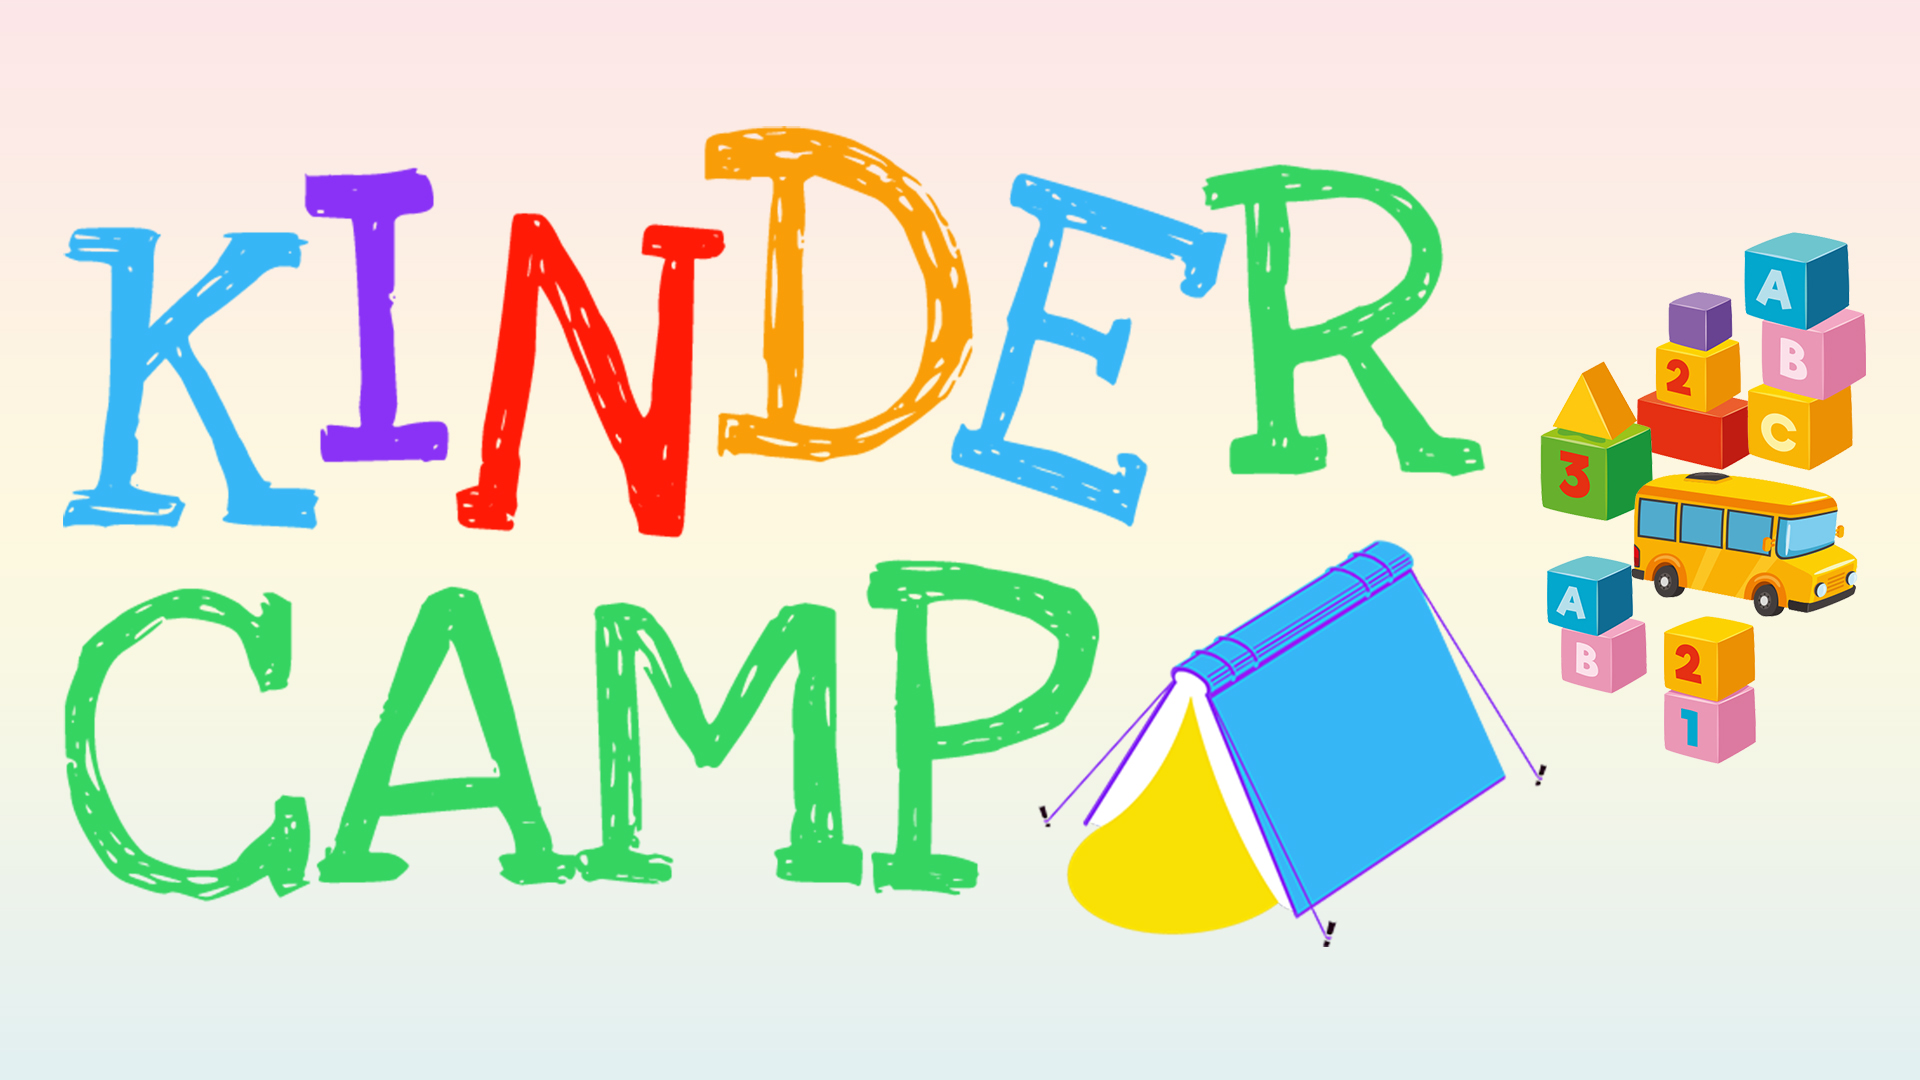 Image reads "Kinder Camp" in colorful lettering against a light colored background. A book made into a tent, number, letter, and shape blocks, and a bus are to the right.